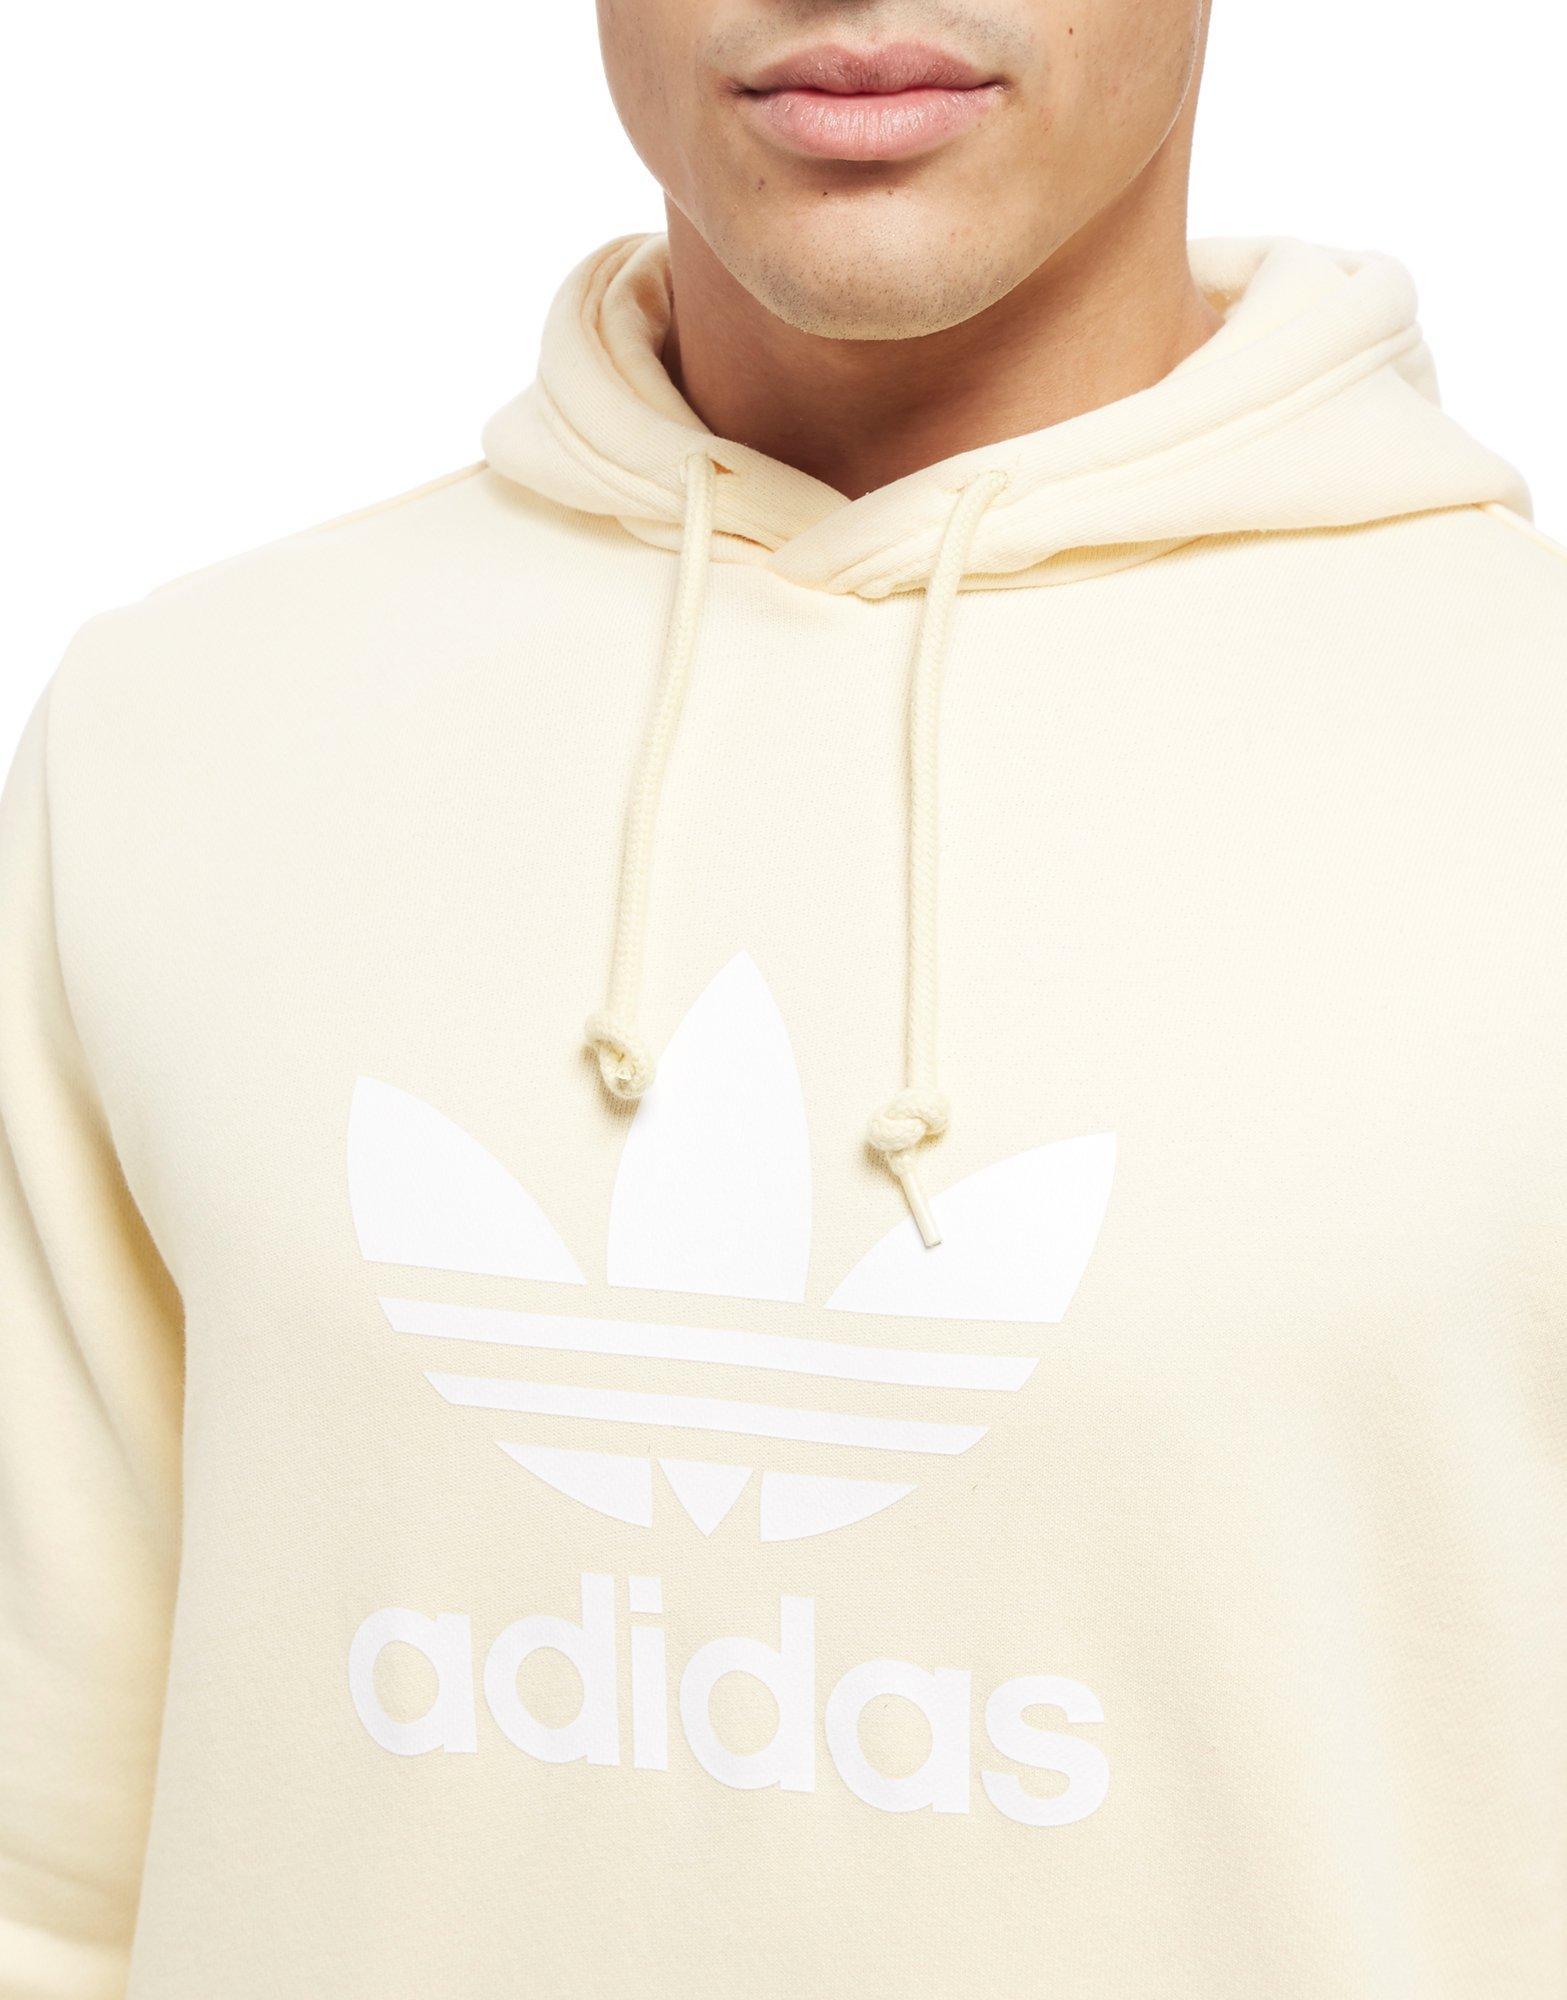 adidas Originals Cotton Trefoil State Overhead Hoodie in Yellow/White  (White) for Men - Lyst